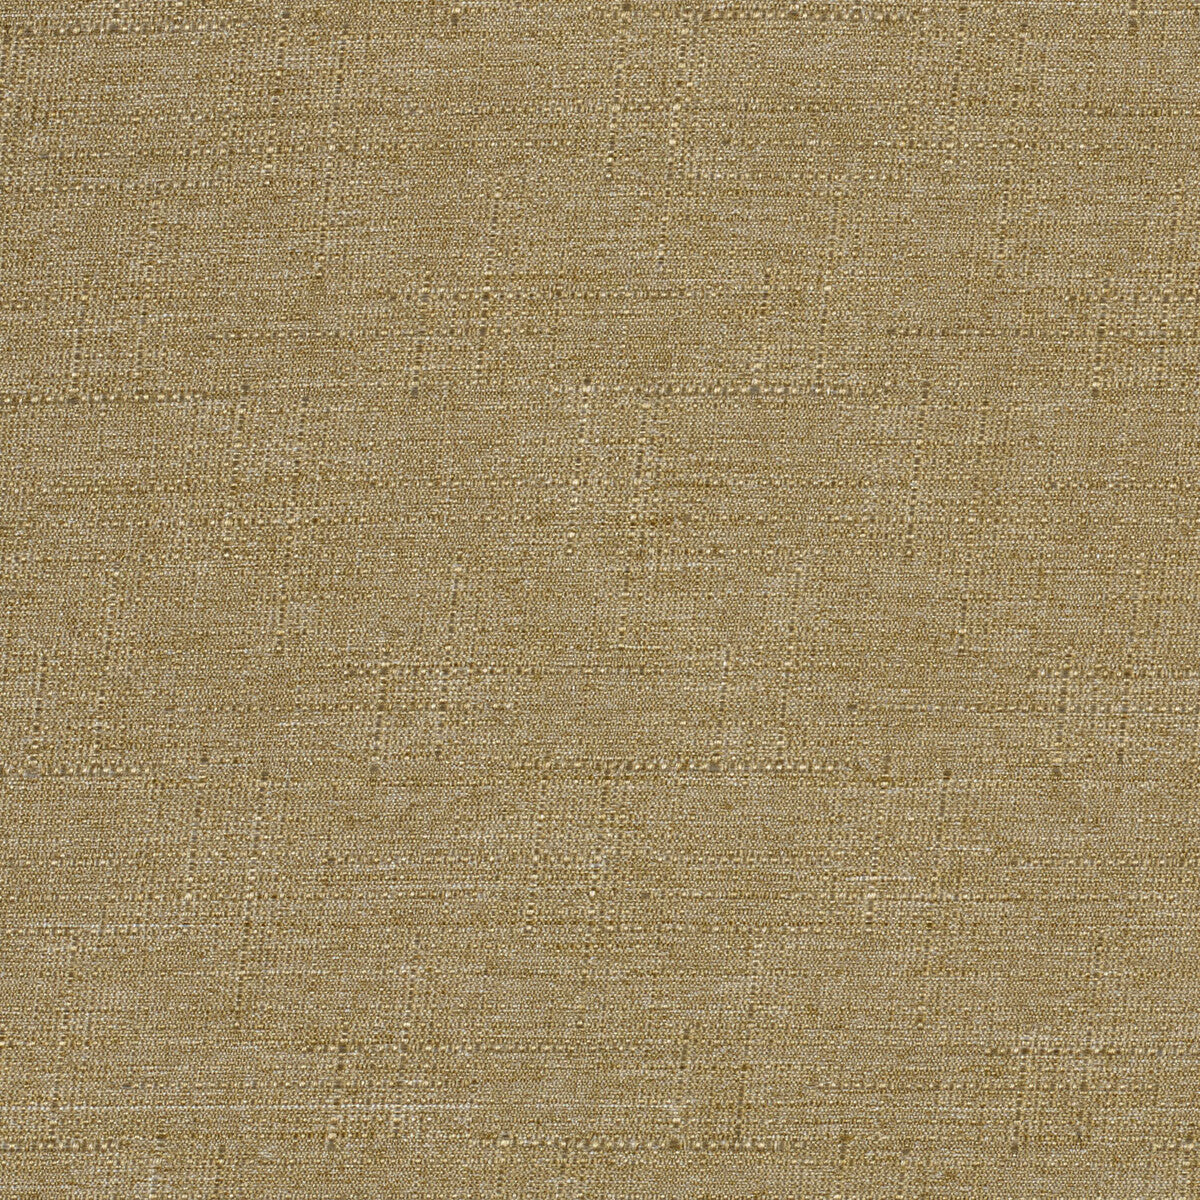 Kravet Contract fabric in 4321-606 color - pattern 4321.606.0 - by Kravet Contract